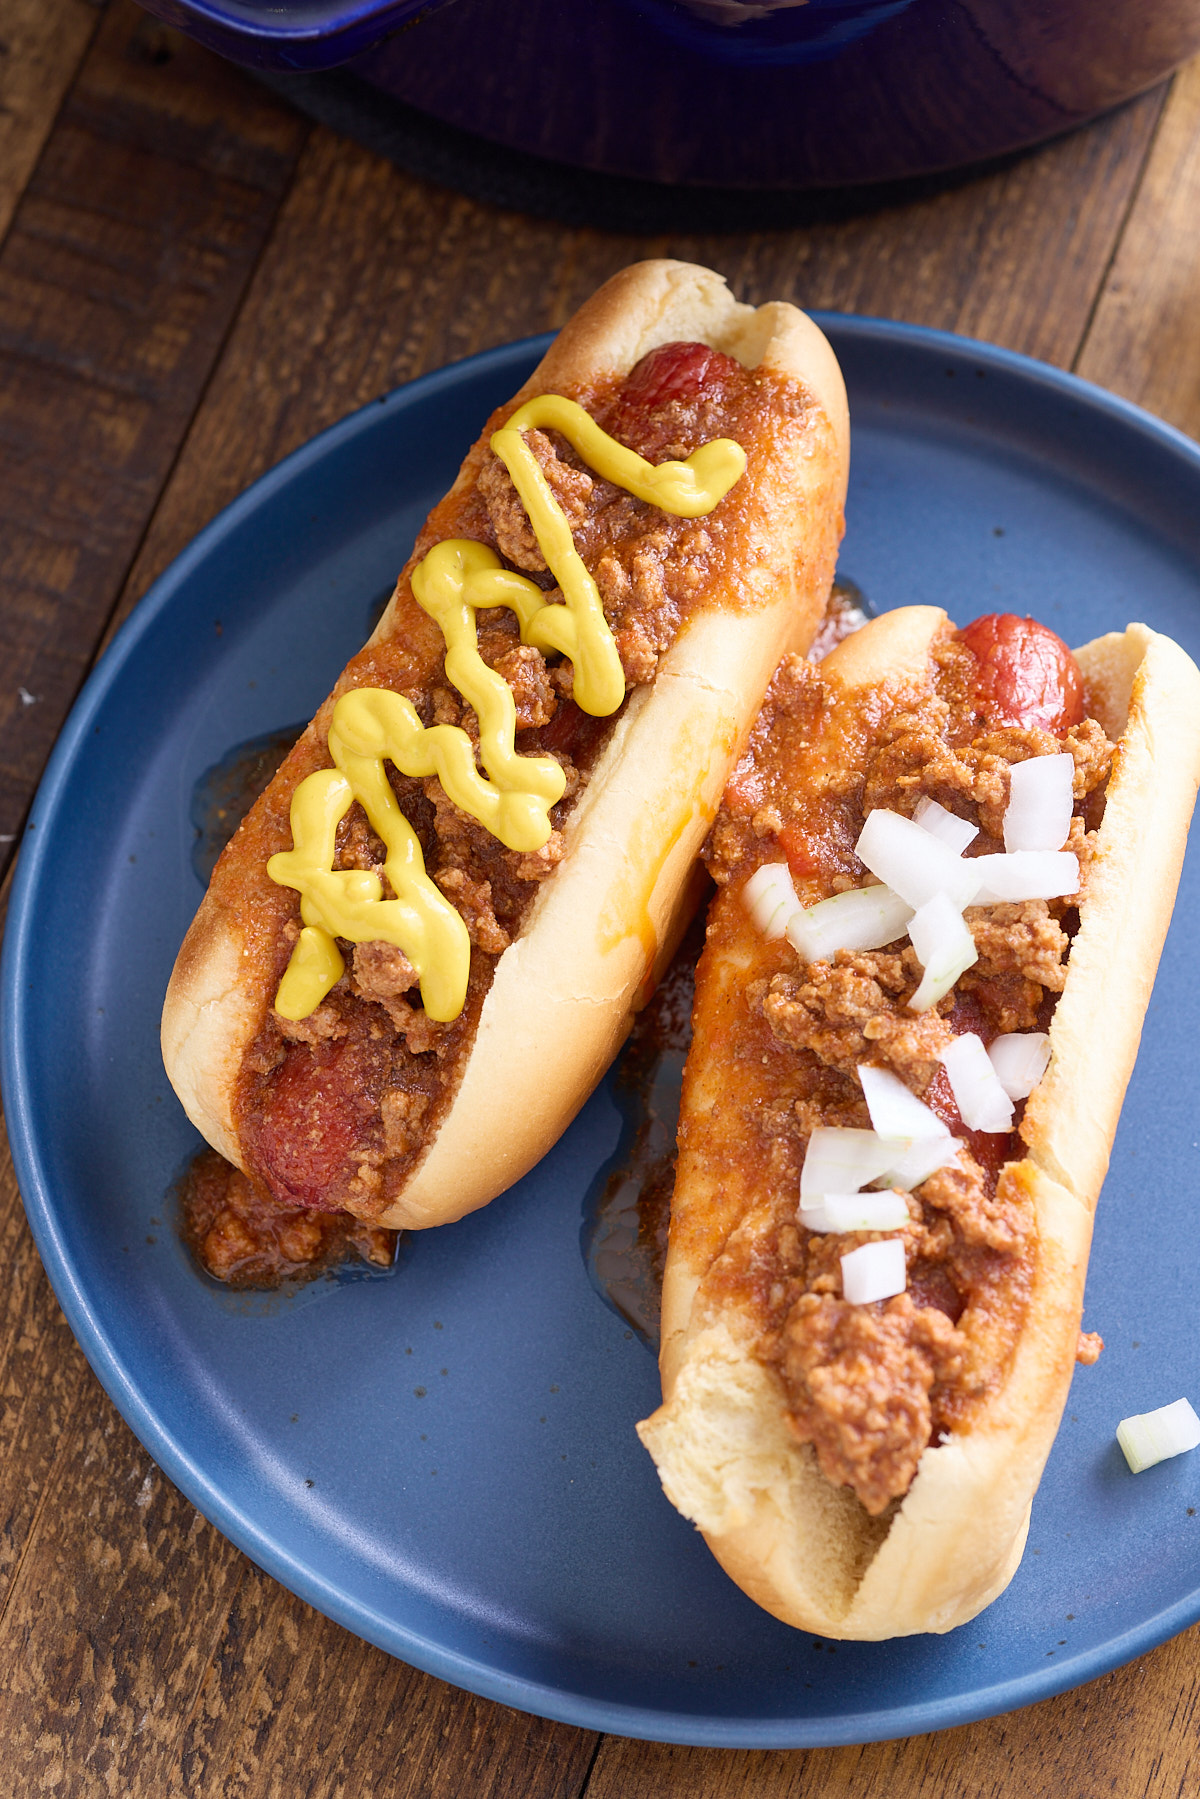 hot dogs with chili and mustard on plate
